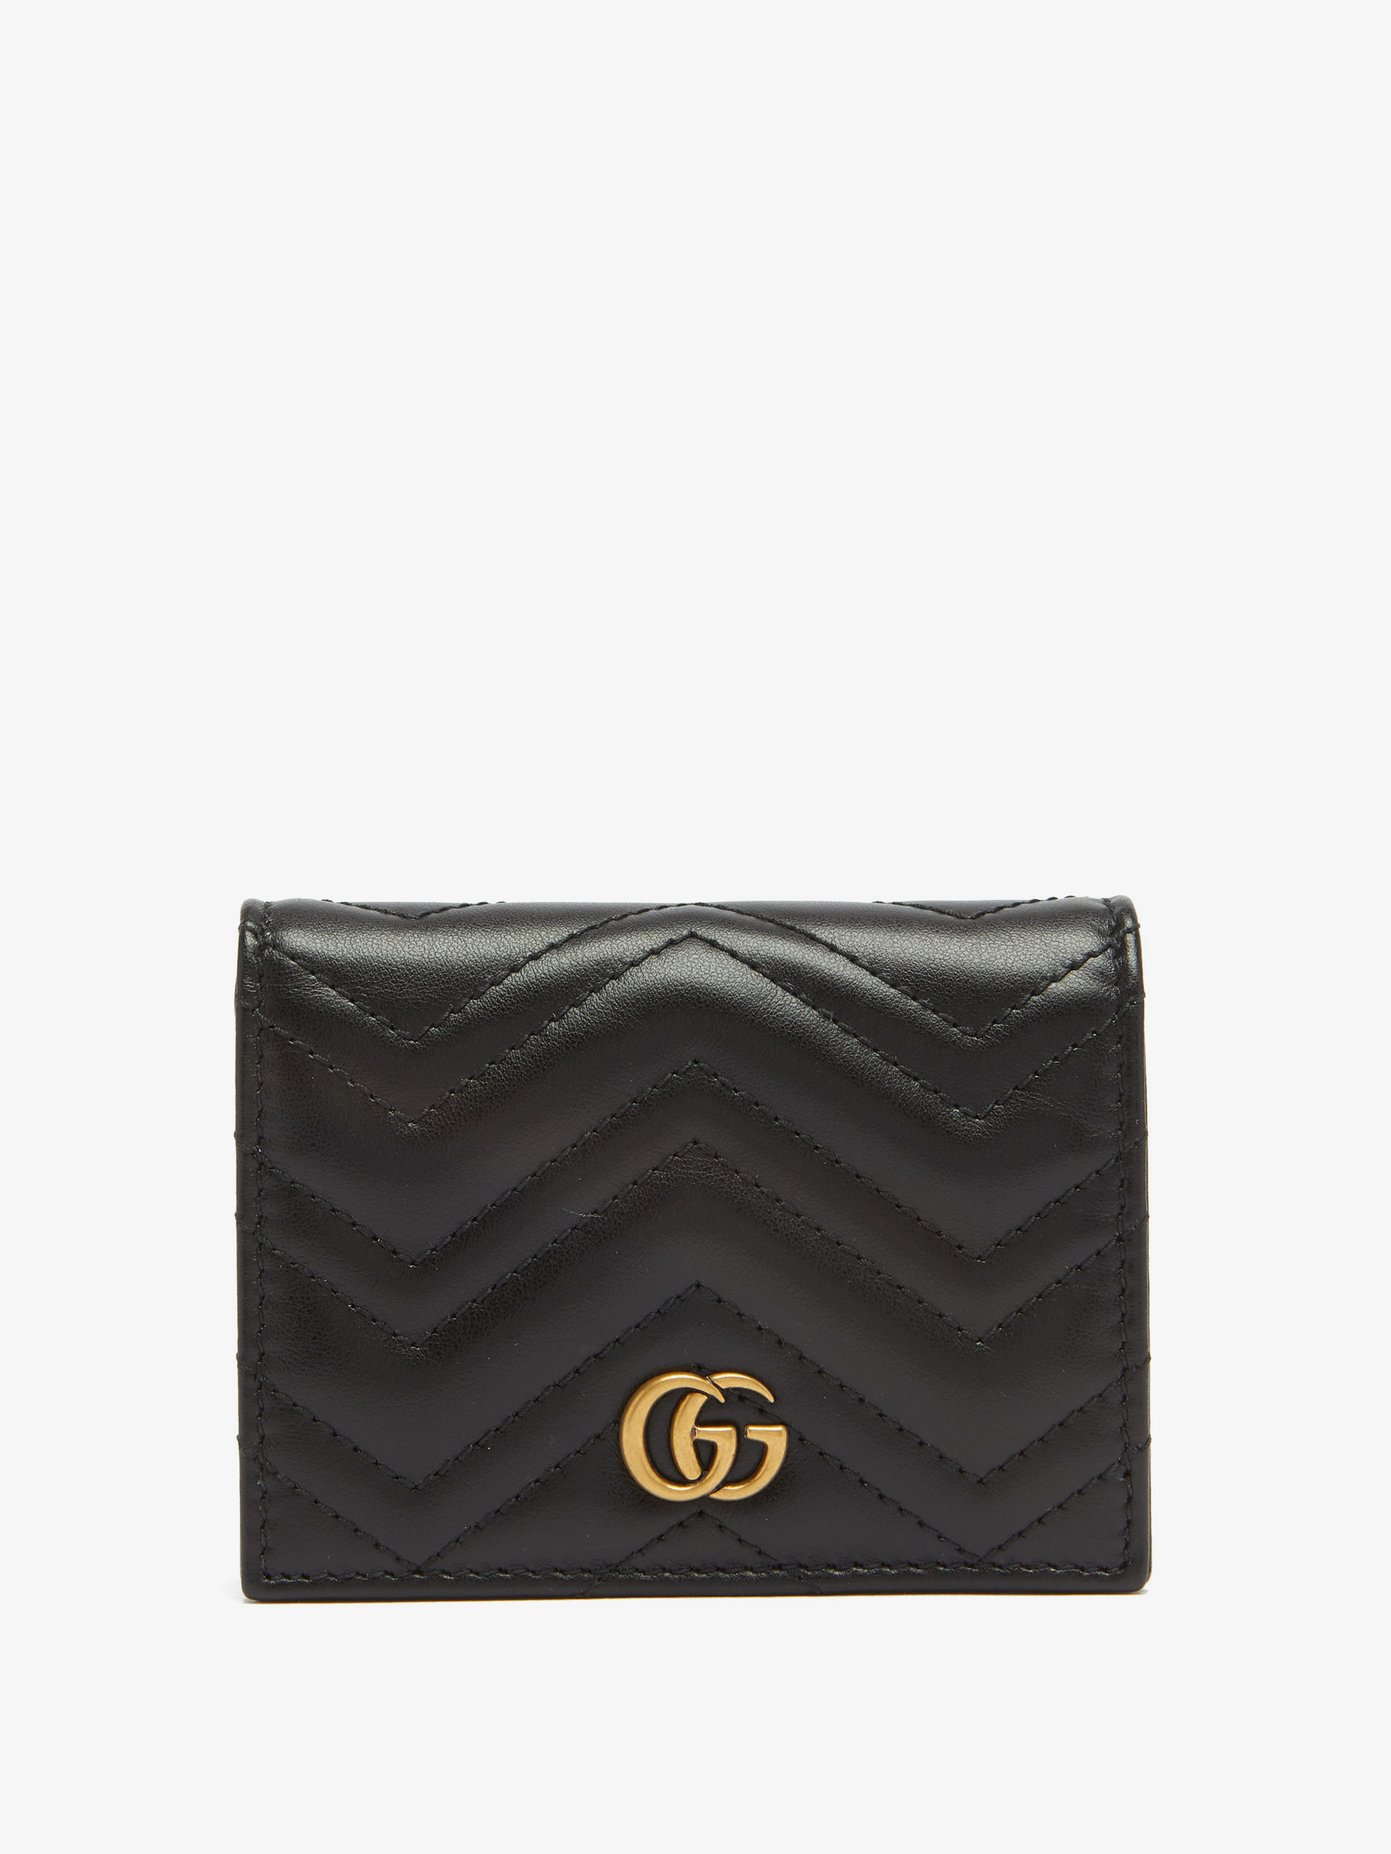 22SS 구찌 GG 마몽 반지갑, 퀼팅 Gucci Black GG Marmont quilted-leather wallet